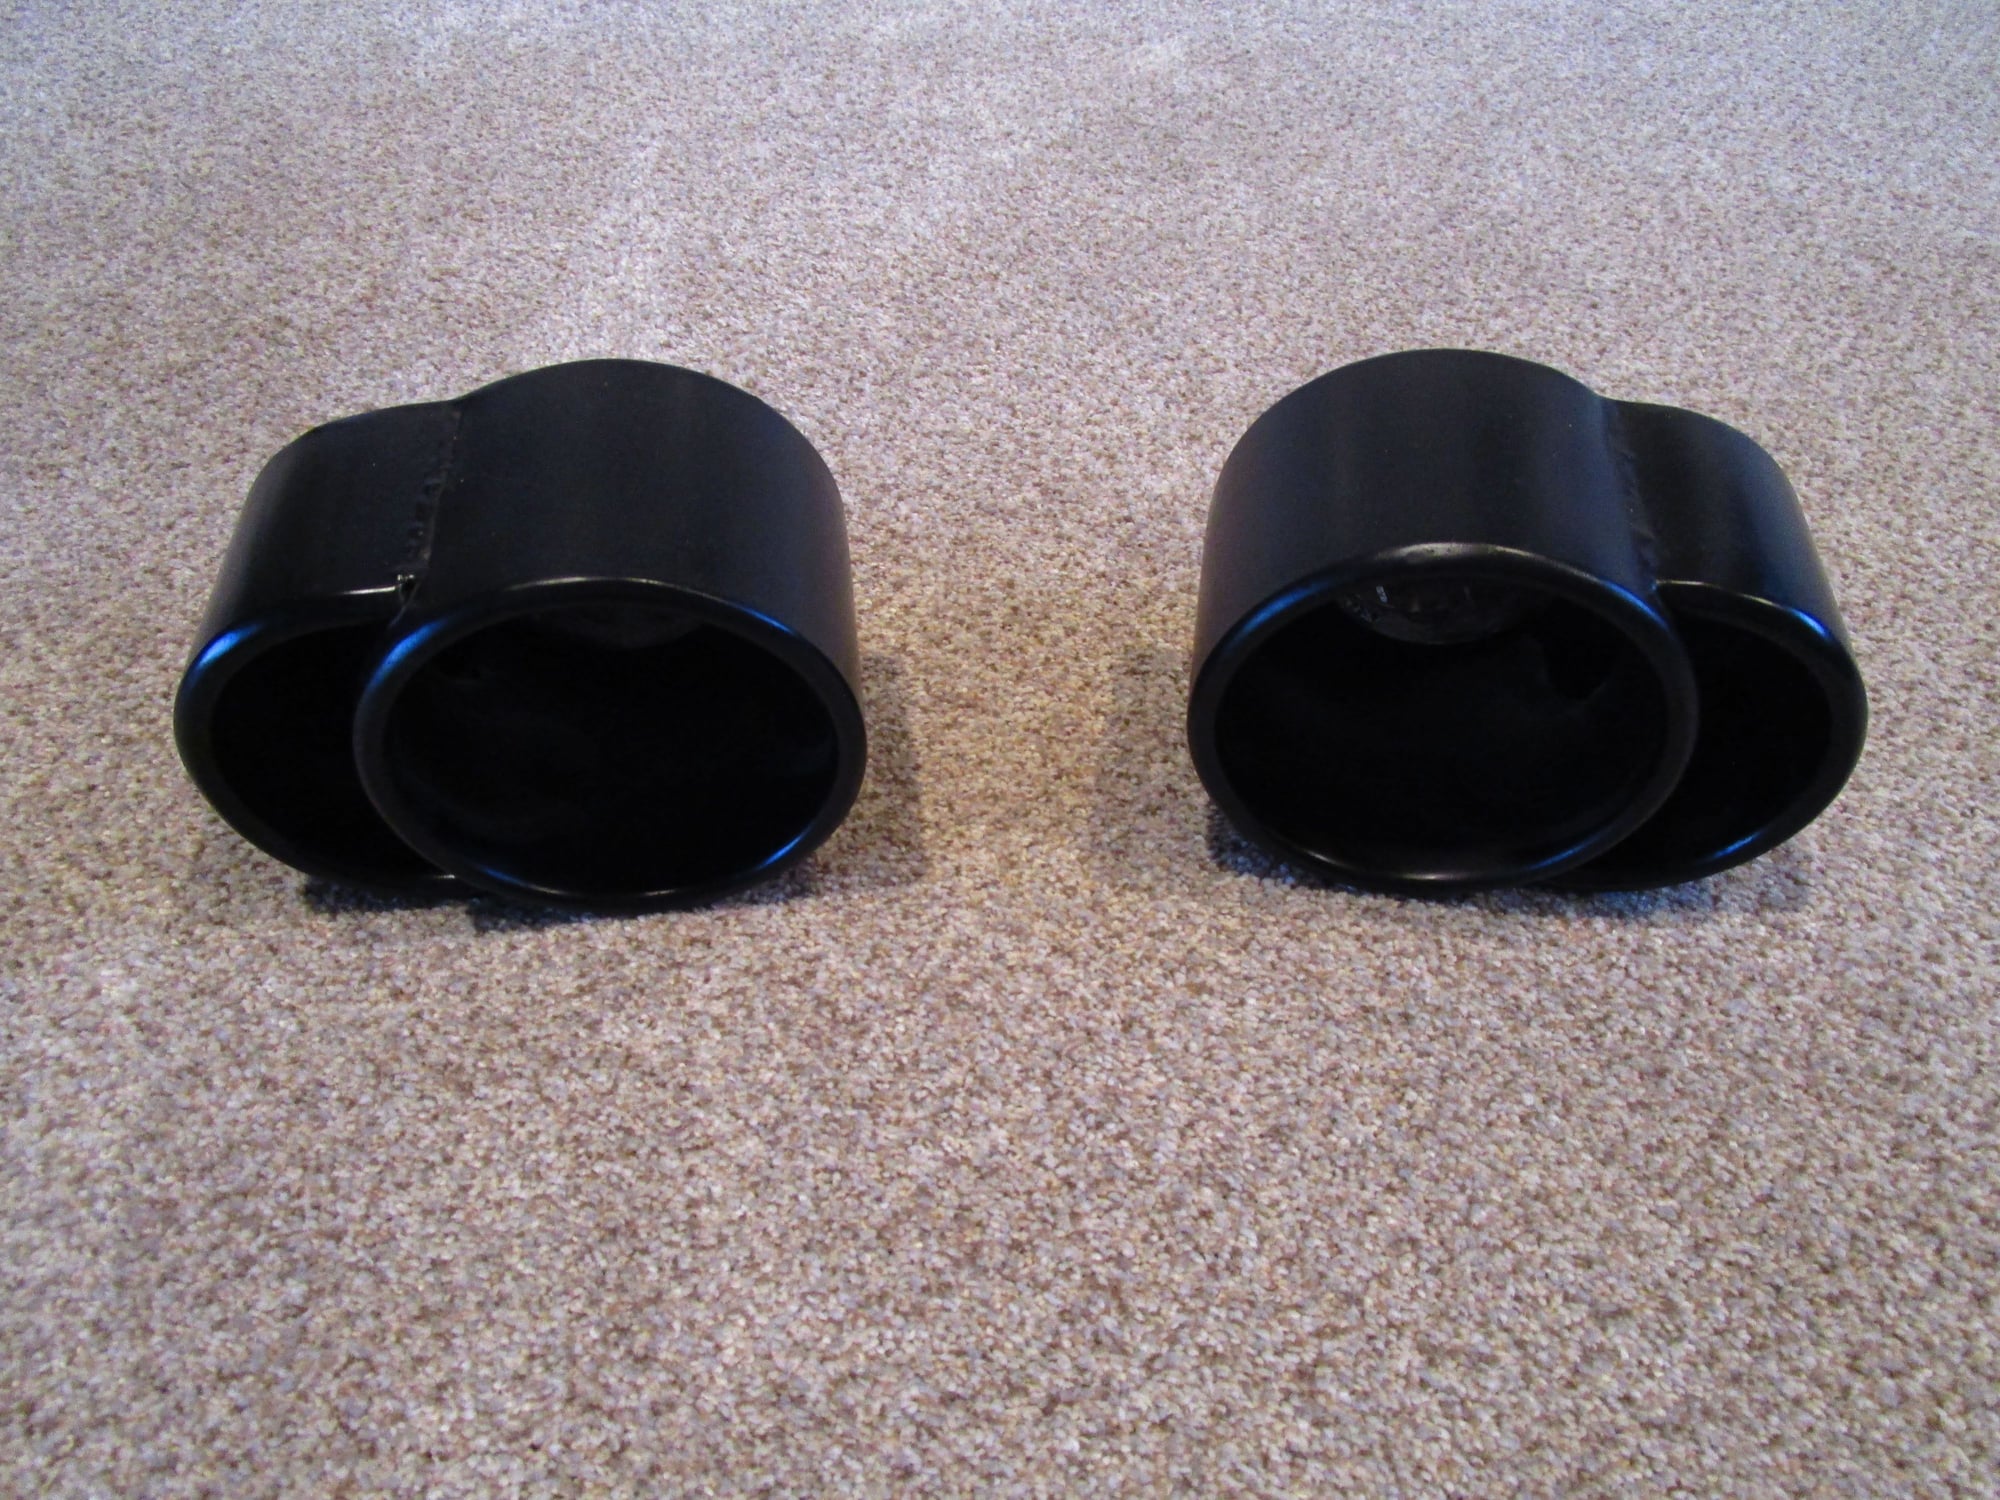 Engine - Exhaust - Exhaust Tips - Used - 2001 to 2005 Porsche 911 - Matawan, NJ 07747, United States